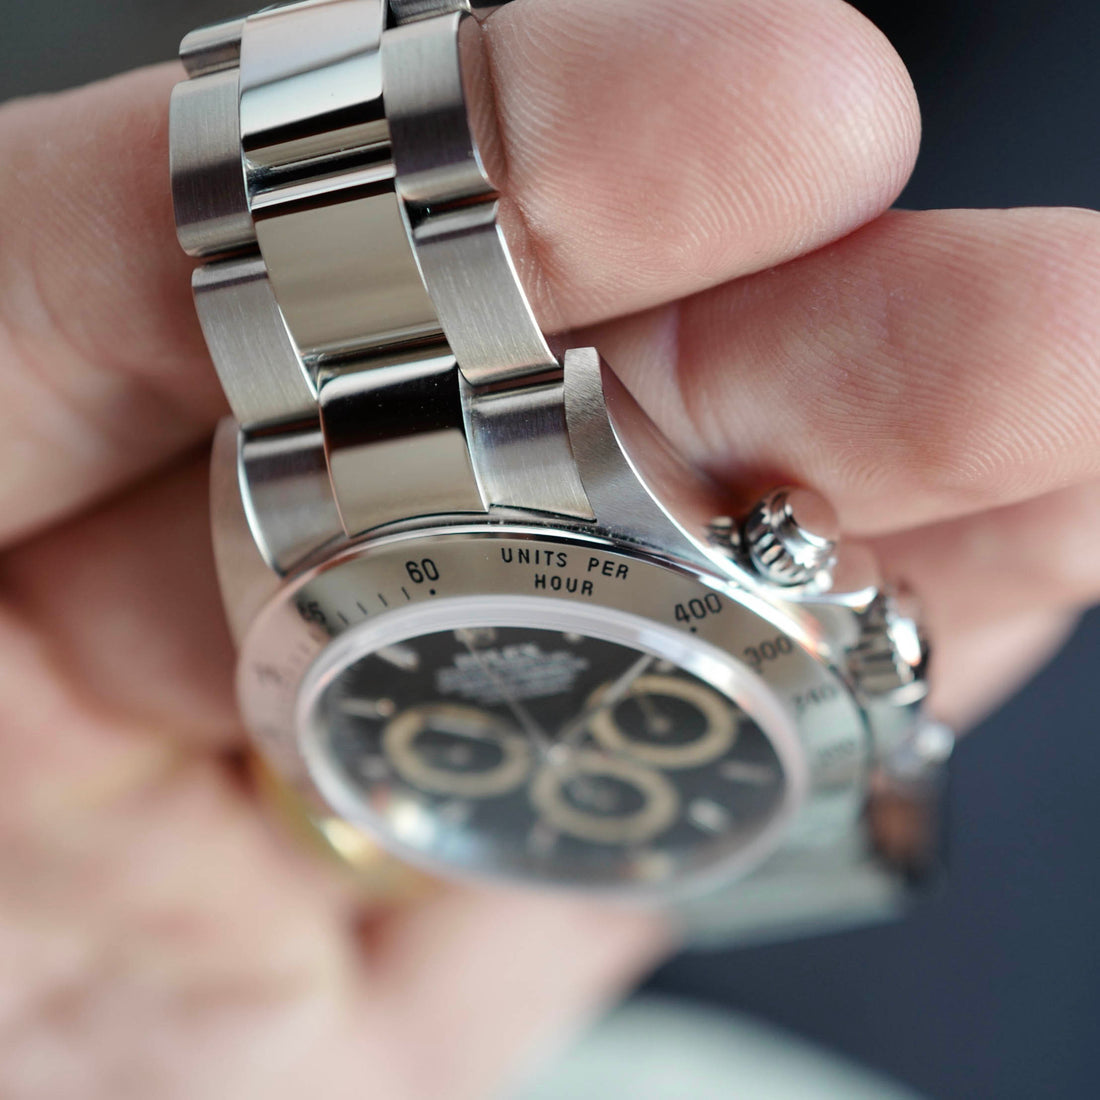 Rolex Steel Zenith Daytona Ref. 16520 in New Old Stock Condition with Papers (NEW ARRIVAL)